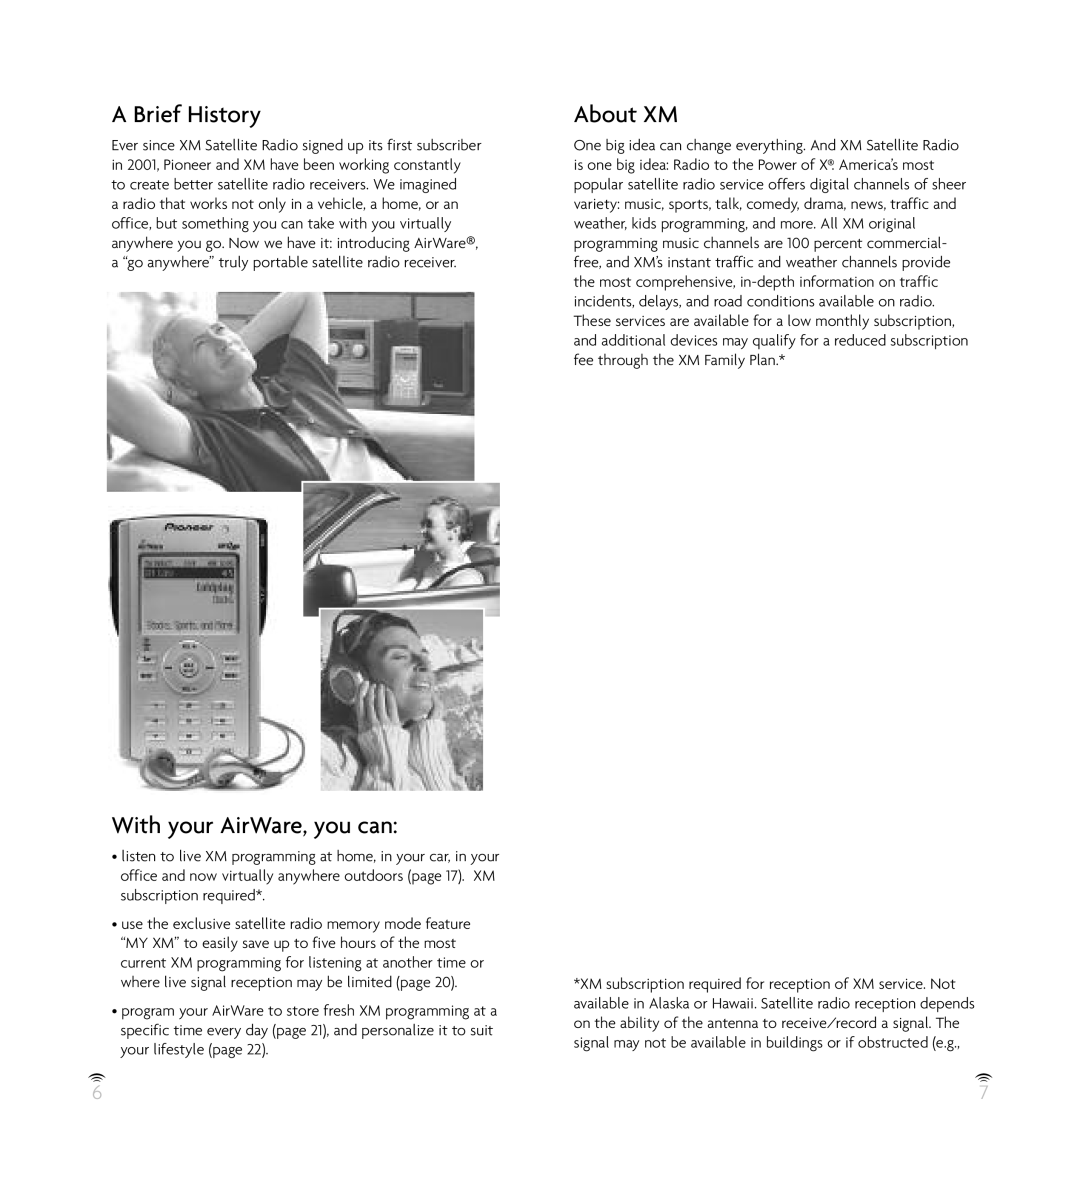 Pioneer GEX-AIRWARE1 manual A Brief History, With your AirWare, you can, About XM 